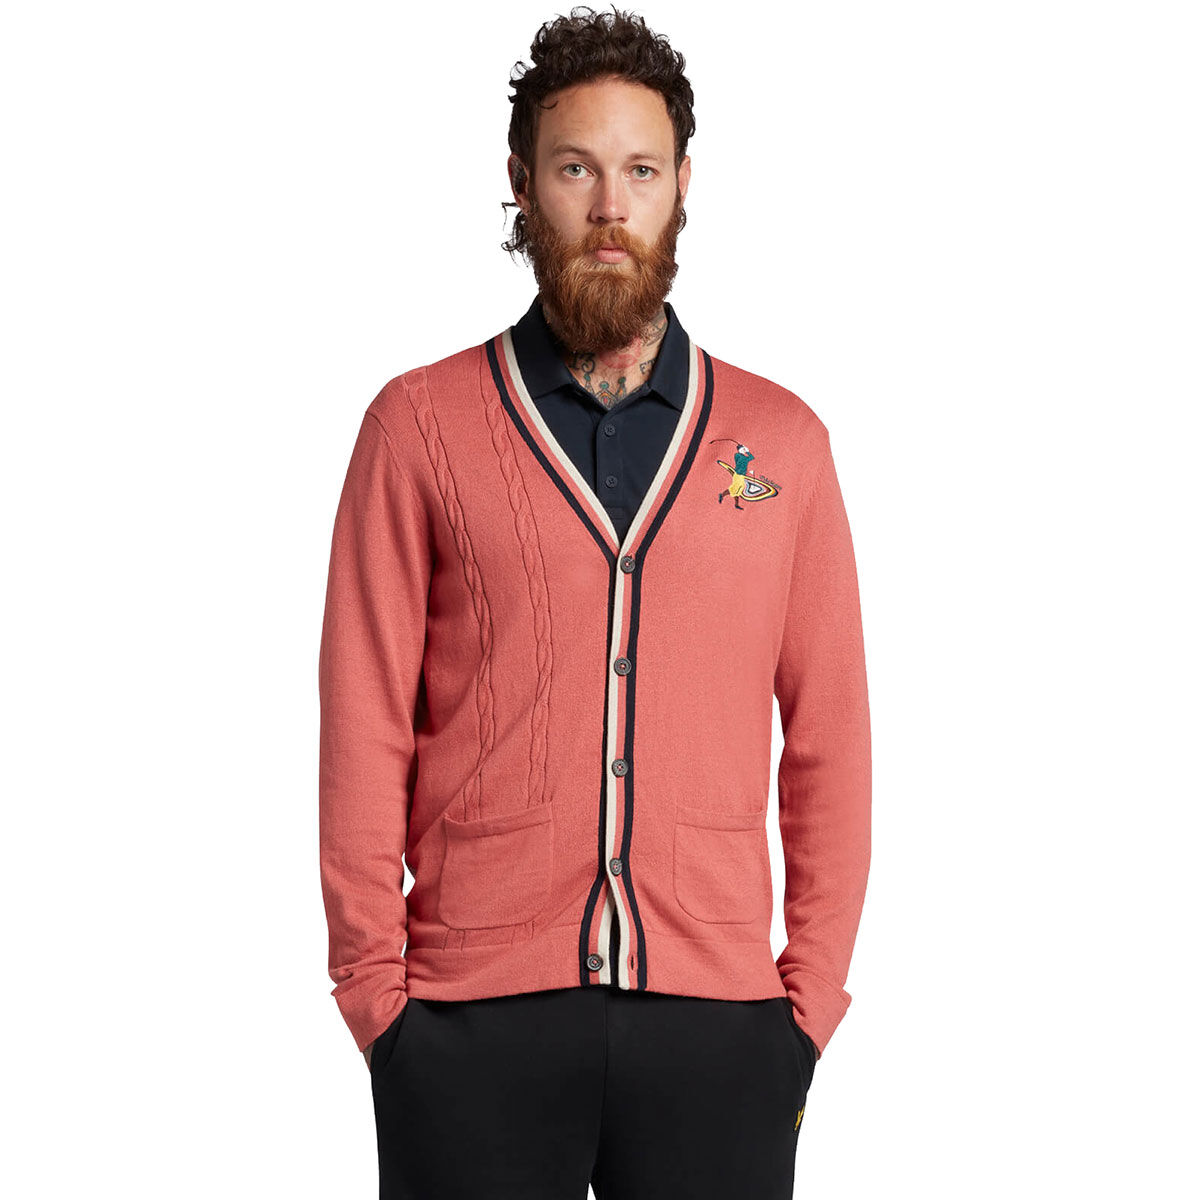 Lyle & Scott Red, Black and White Comfortable Striped Men`s The Gregor Golf Cardigan, Size: Small | American Golf